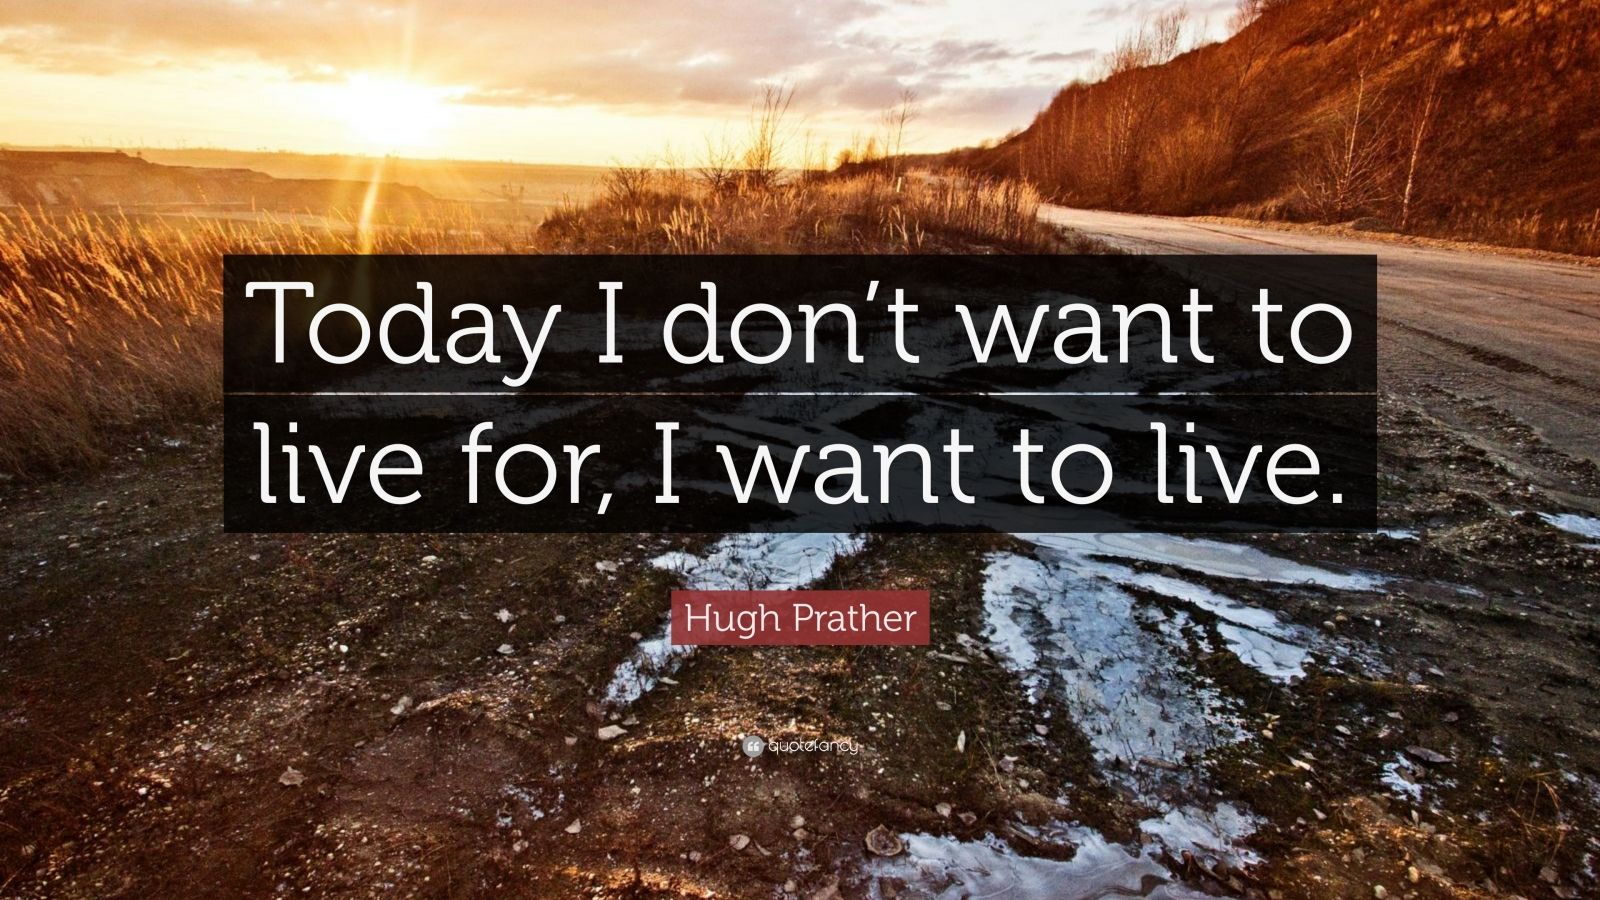 Hugh Prather Quote: “Today I don’t want to live for, I want to live.”